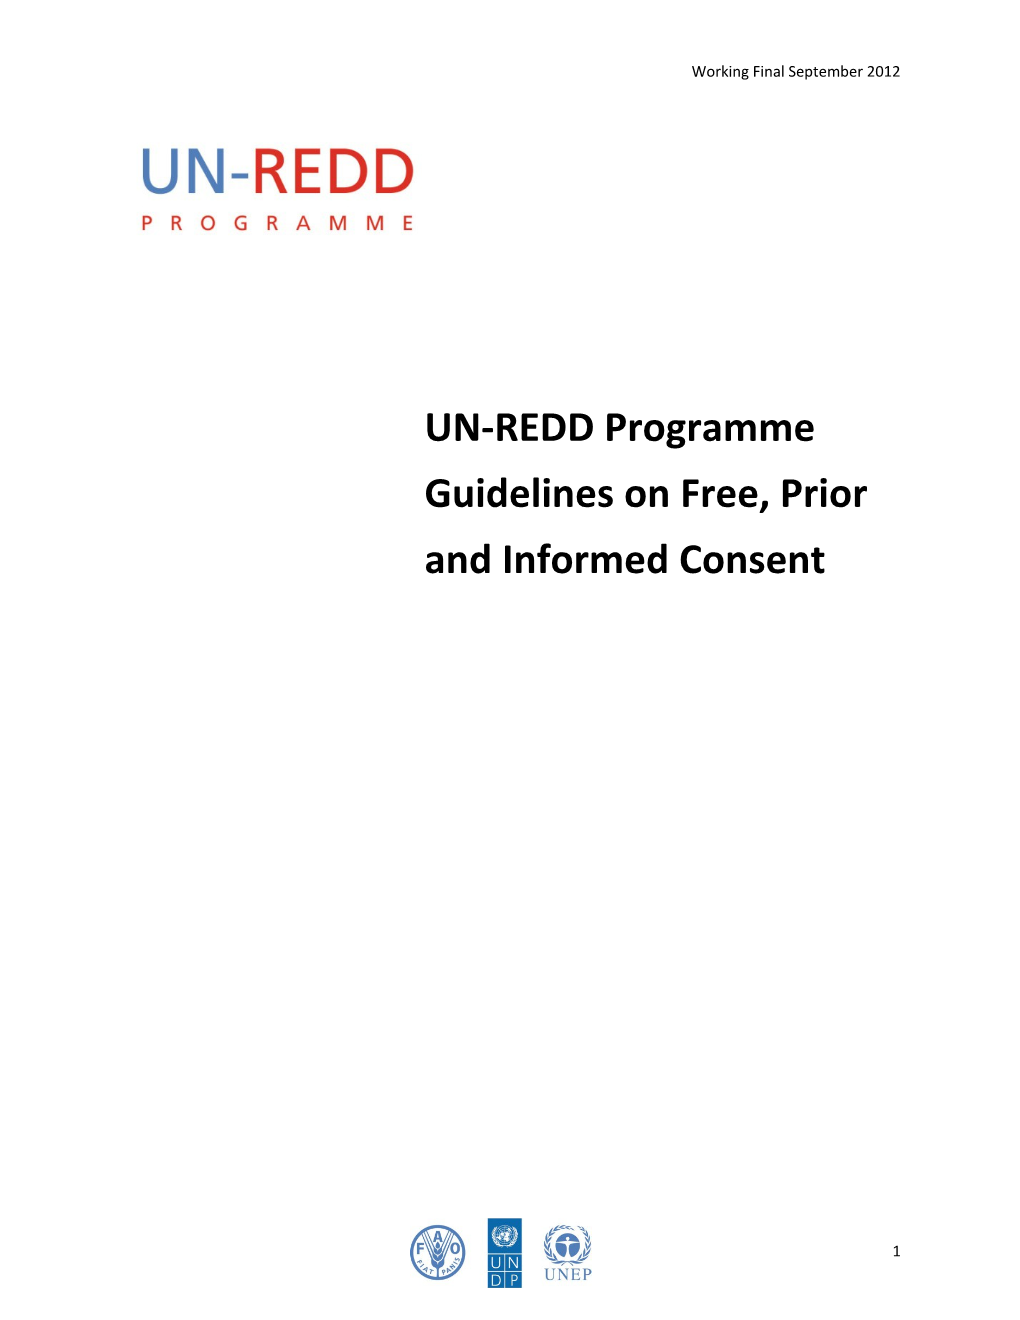 UN-REDD Programme Guidelines for Seeking the Free, Prior, and Informed Consent of Indigenous